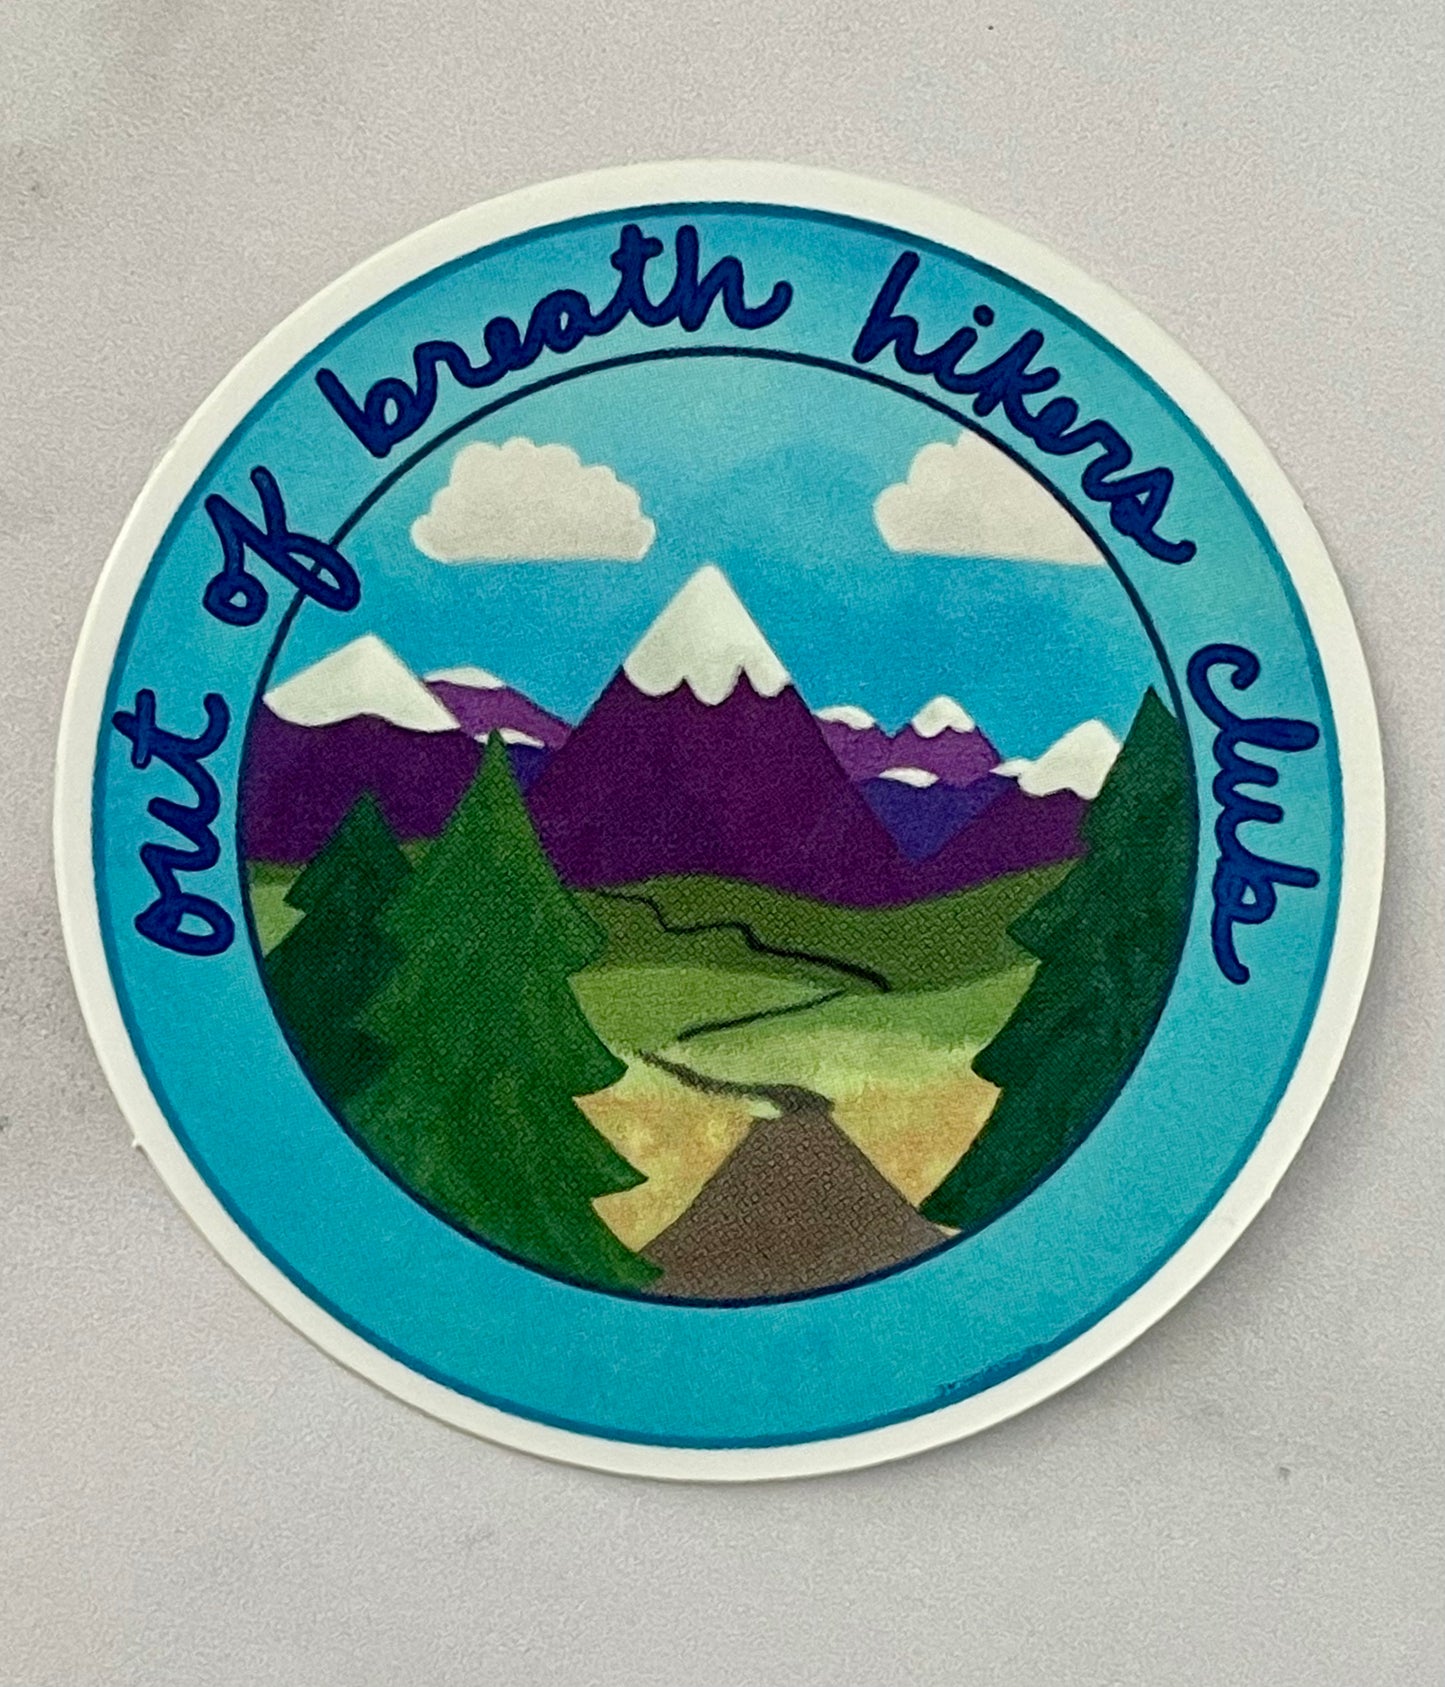 Out of Breath Hikers Club Round Vinyl Sticker